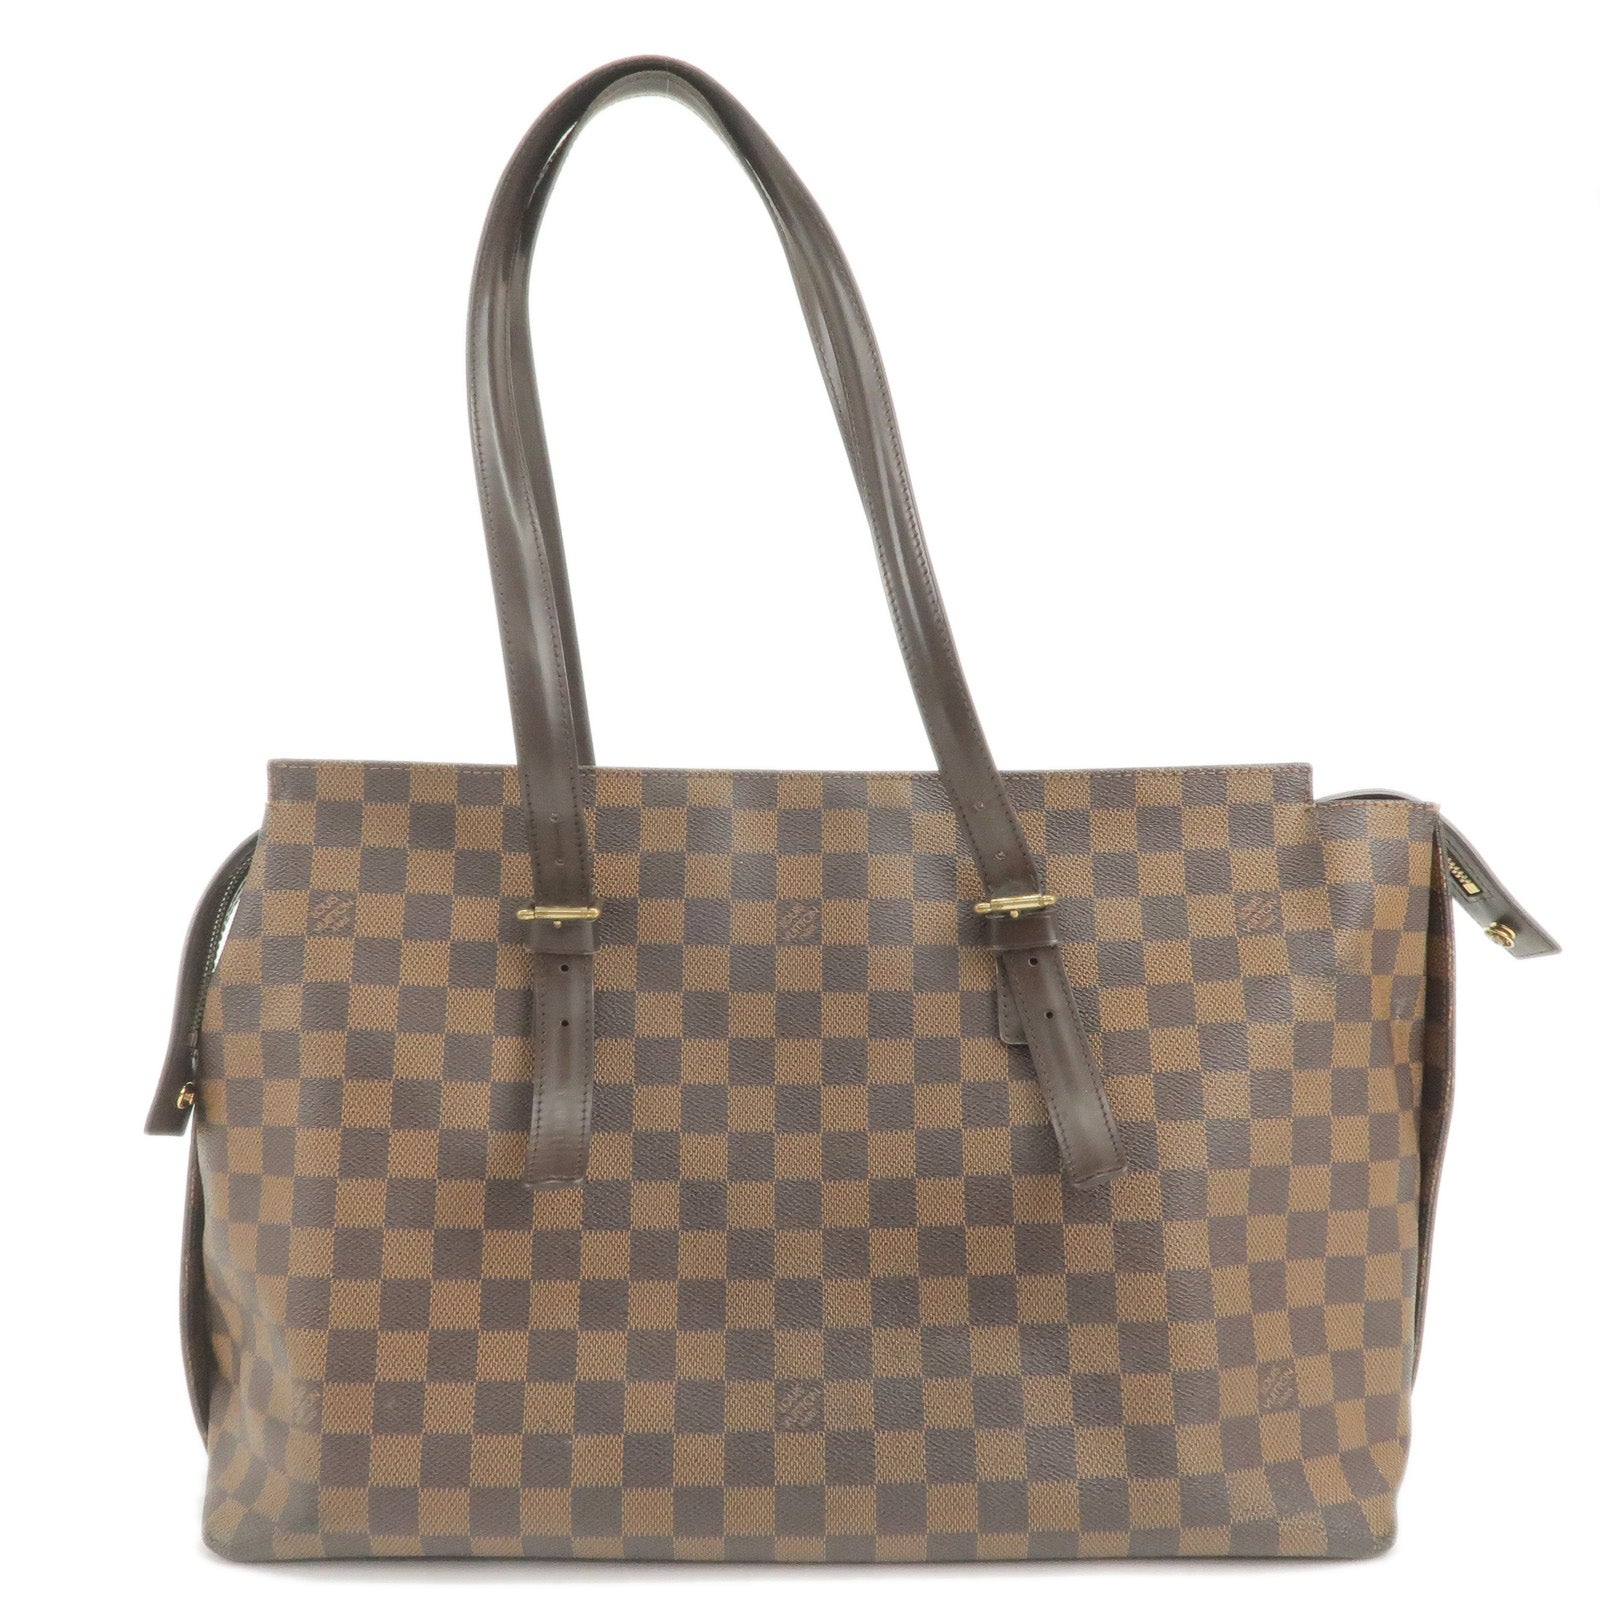 N51119 – louis vuitton 2002 pre owned cabas piano tote bag item - Chelsea -  Damier - Bag - Louis - Tote - Vuitton - louis vuitton 2002 pre owned cabas piano  tote bag item